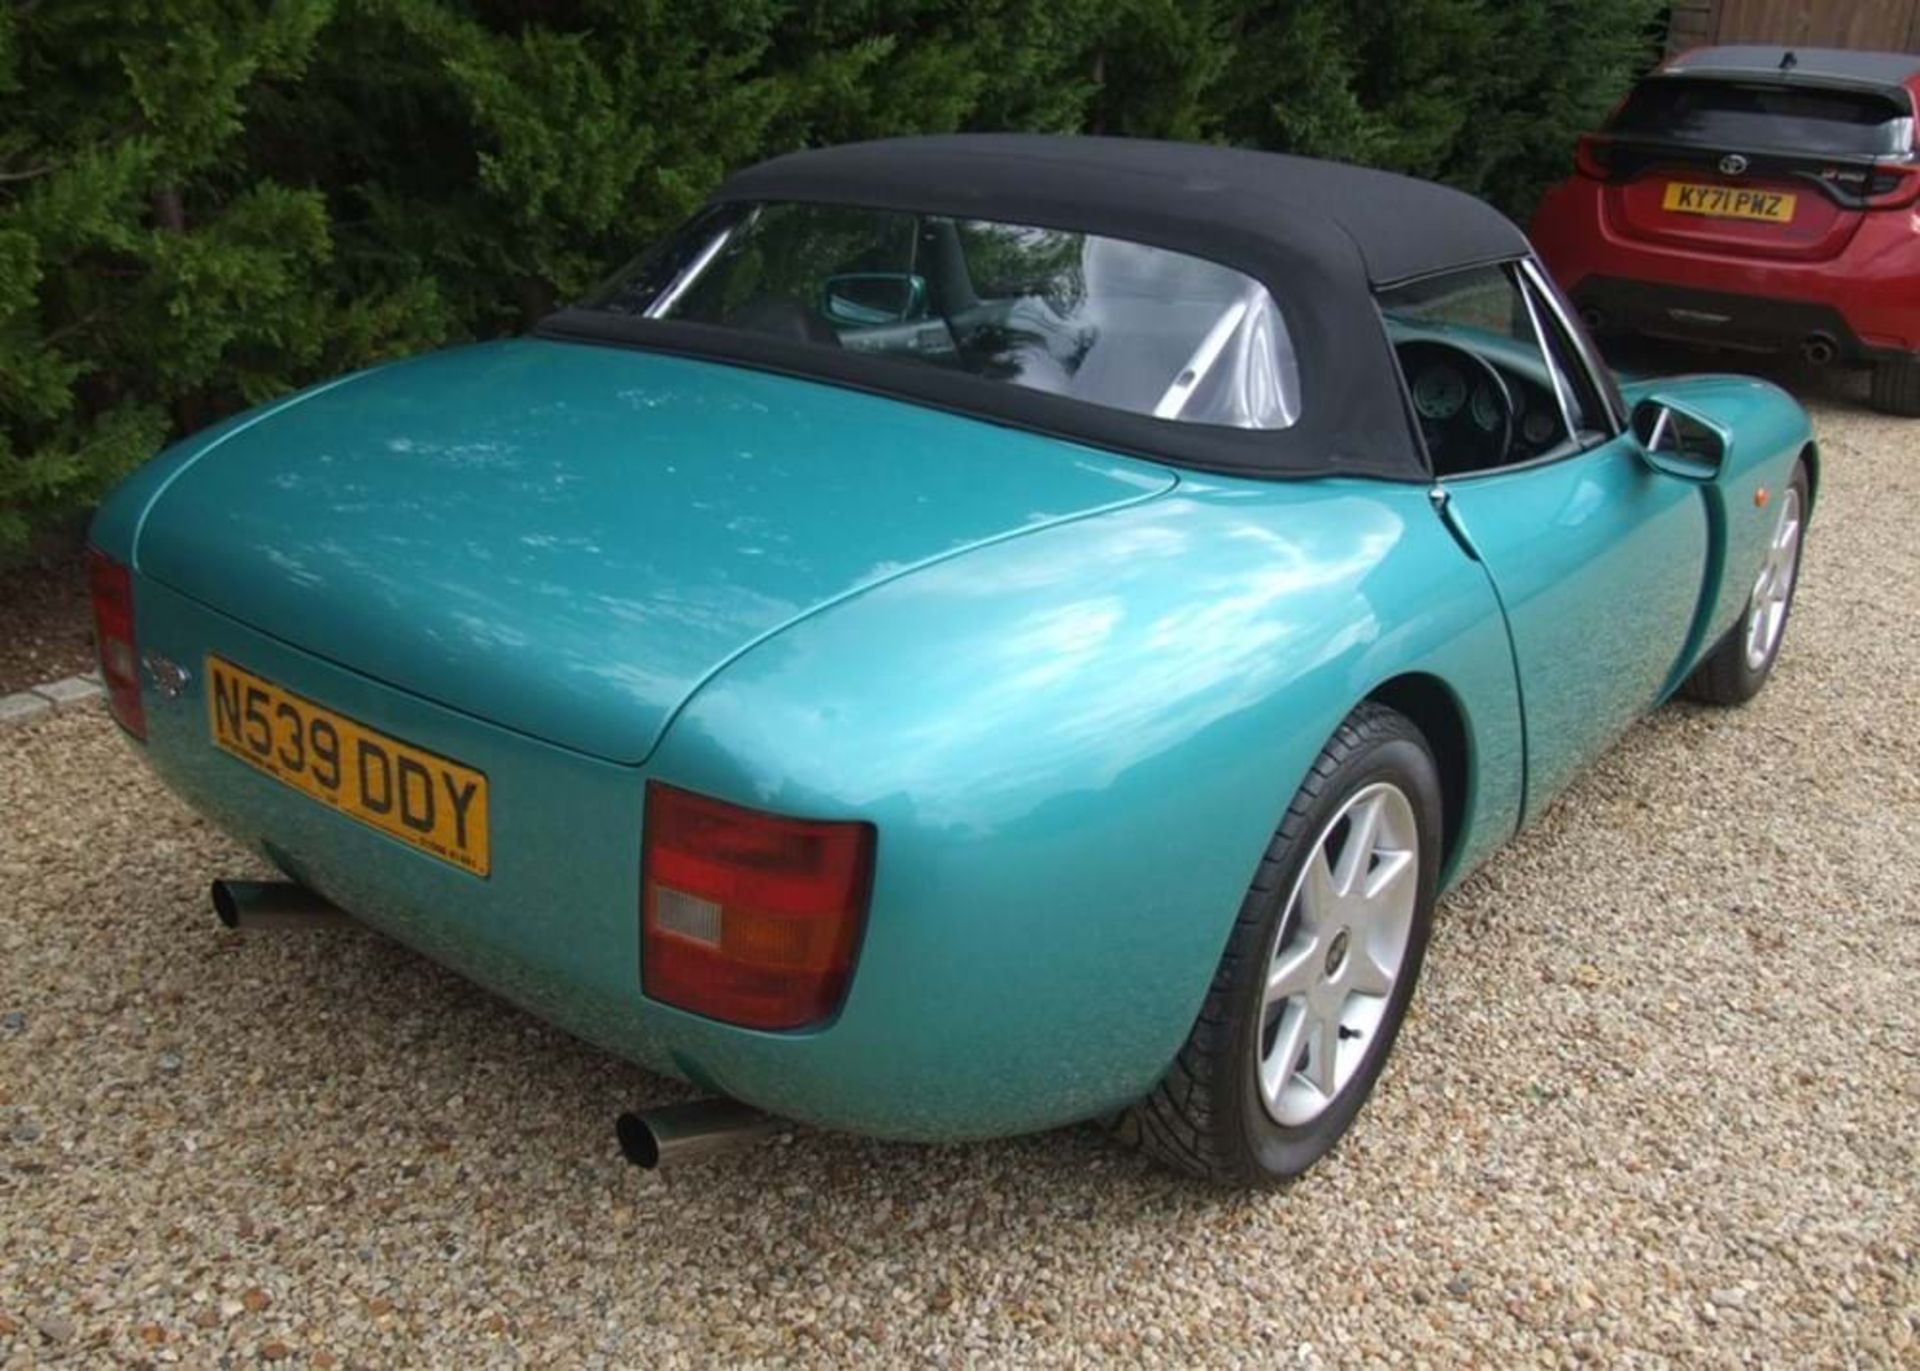 1996 TVR Griffith 500 - Image 4 of 8